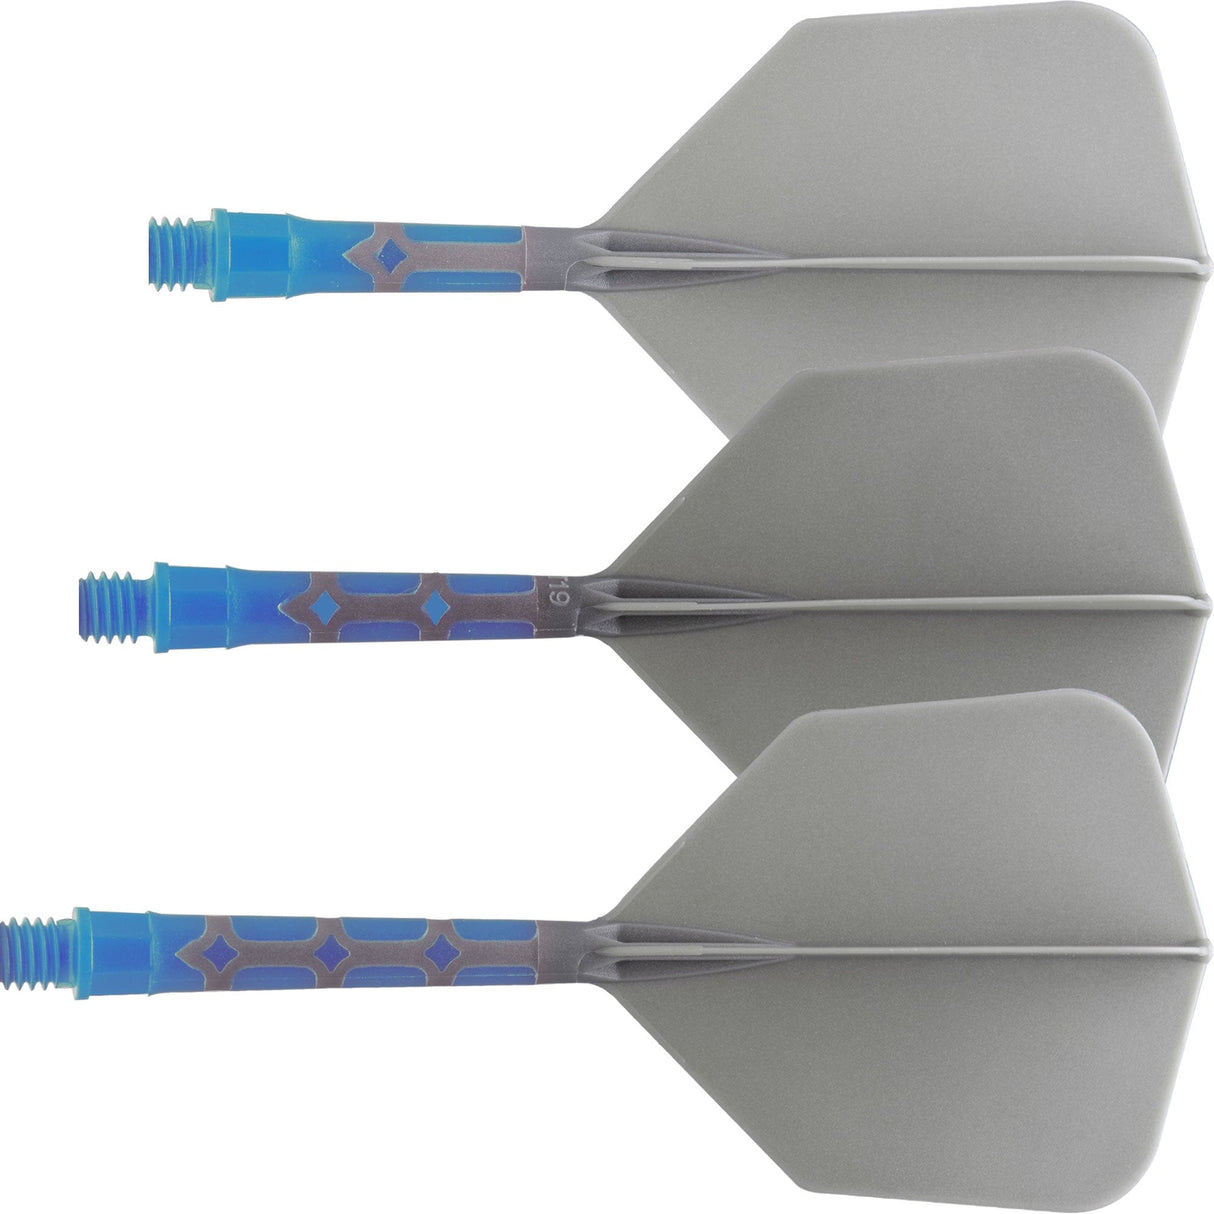 Cuesoul Rost T19 Integrated Dart Shaft and Flights - Big Wing - Sky Blue with Grey Flight